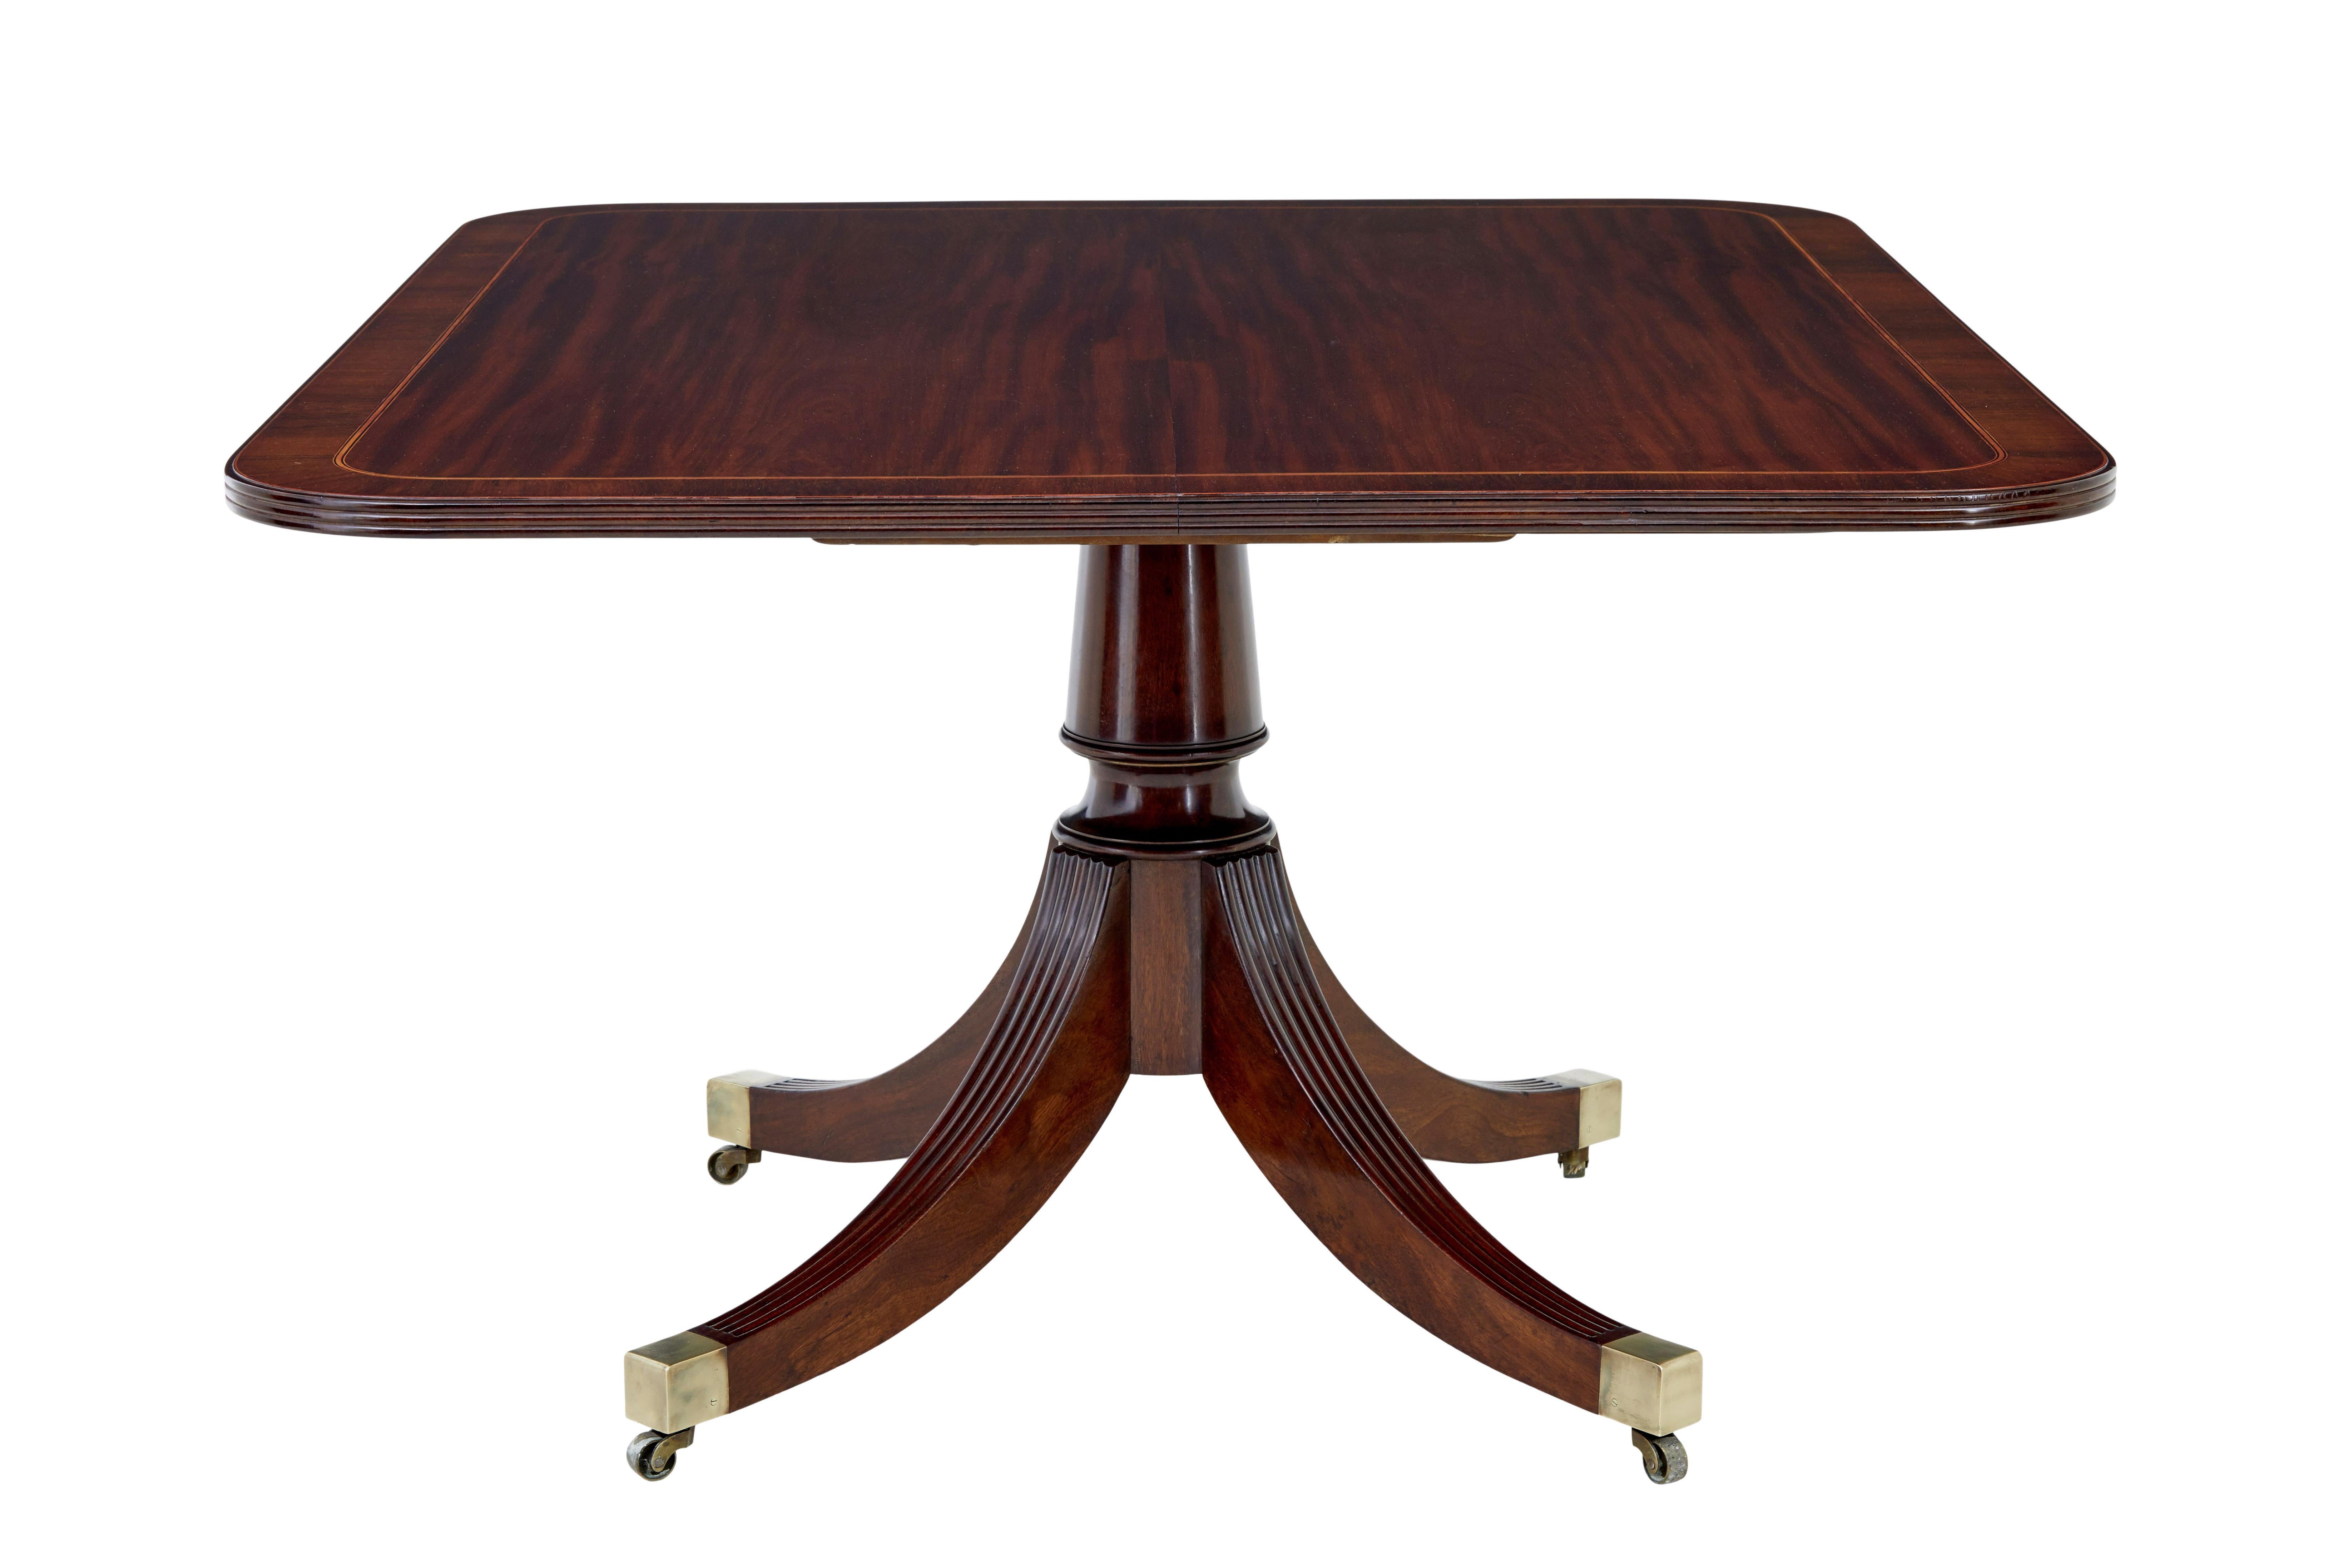 Early 19th century mahogany breakfast table circa 1810.

Fine quality late georgian breakfast table that seats a comfortable 6.  Rectangular top with rounded corners and reeded detailing.  Satinwood stringing detail border to the top surface.

Top